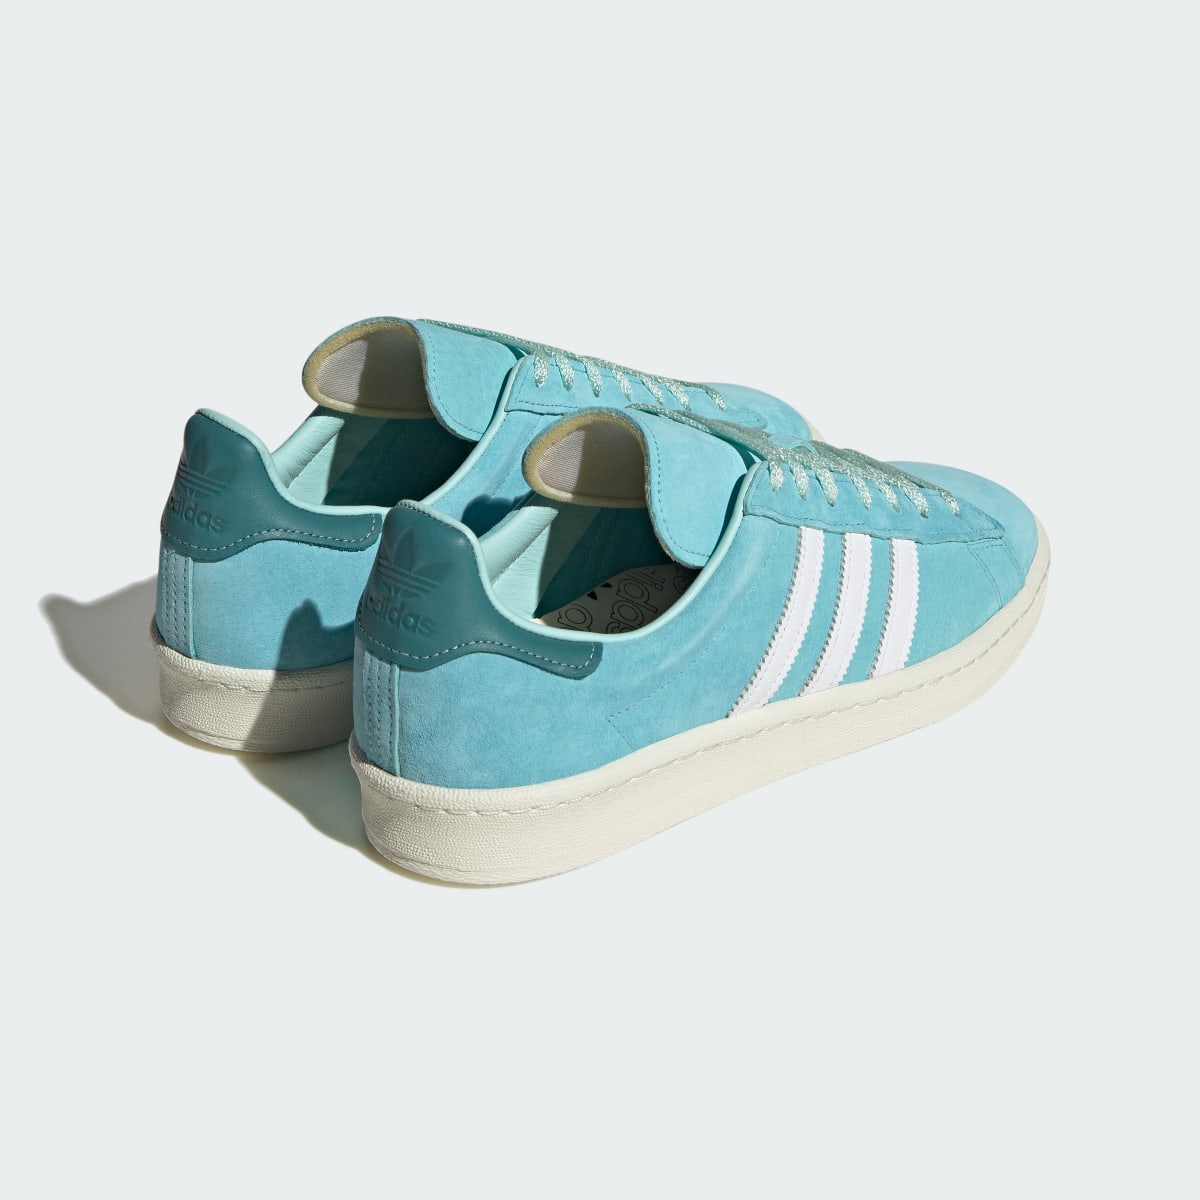 Adidas Campus 80s Shoes. 6